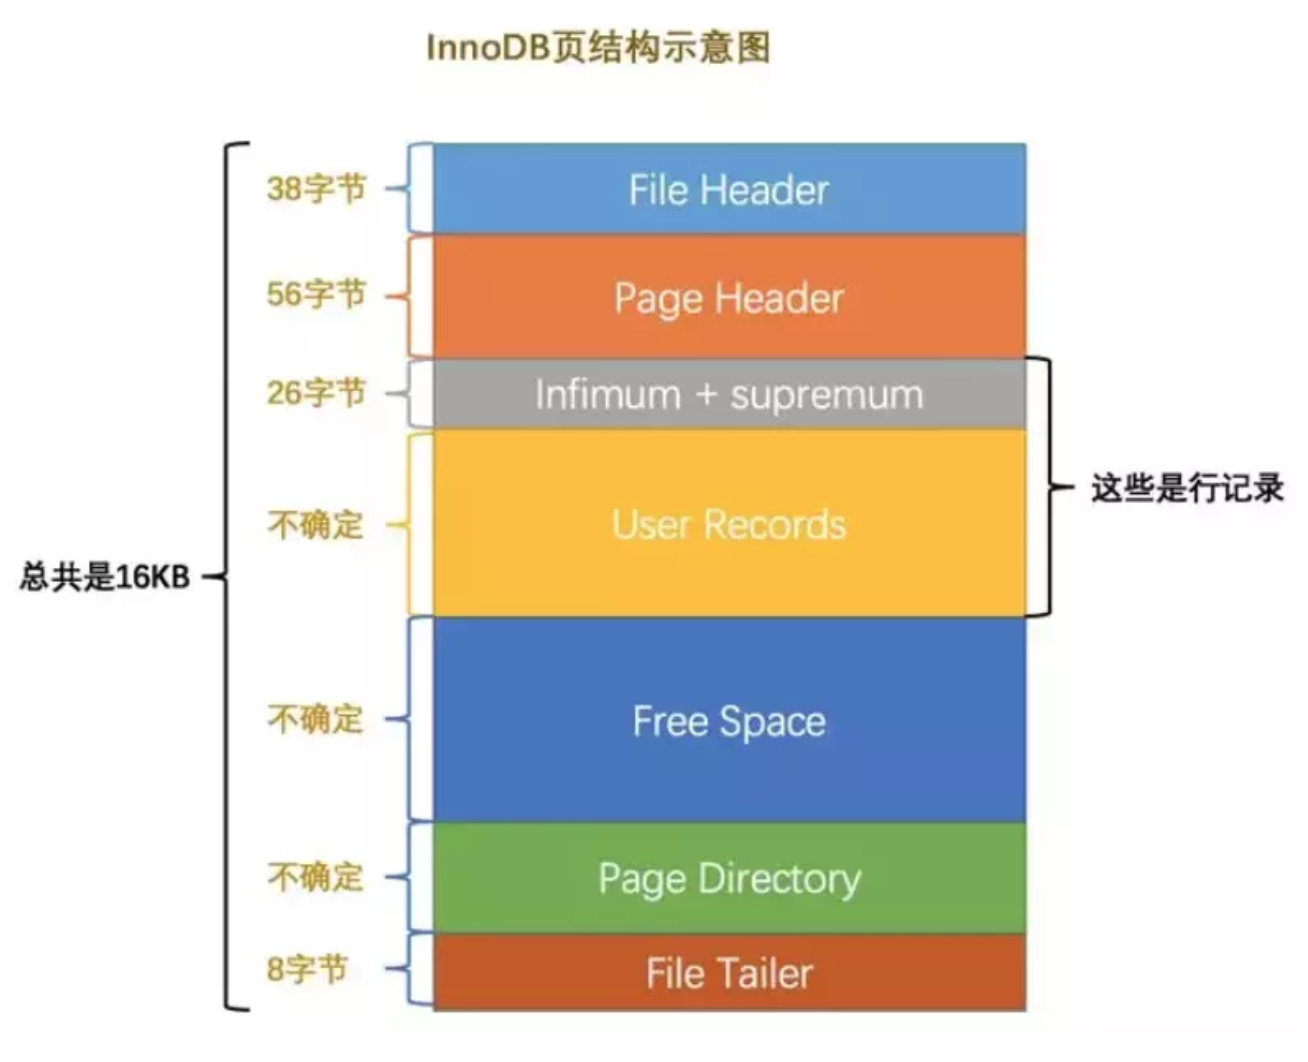 innoDB-page.png